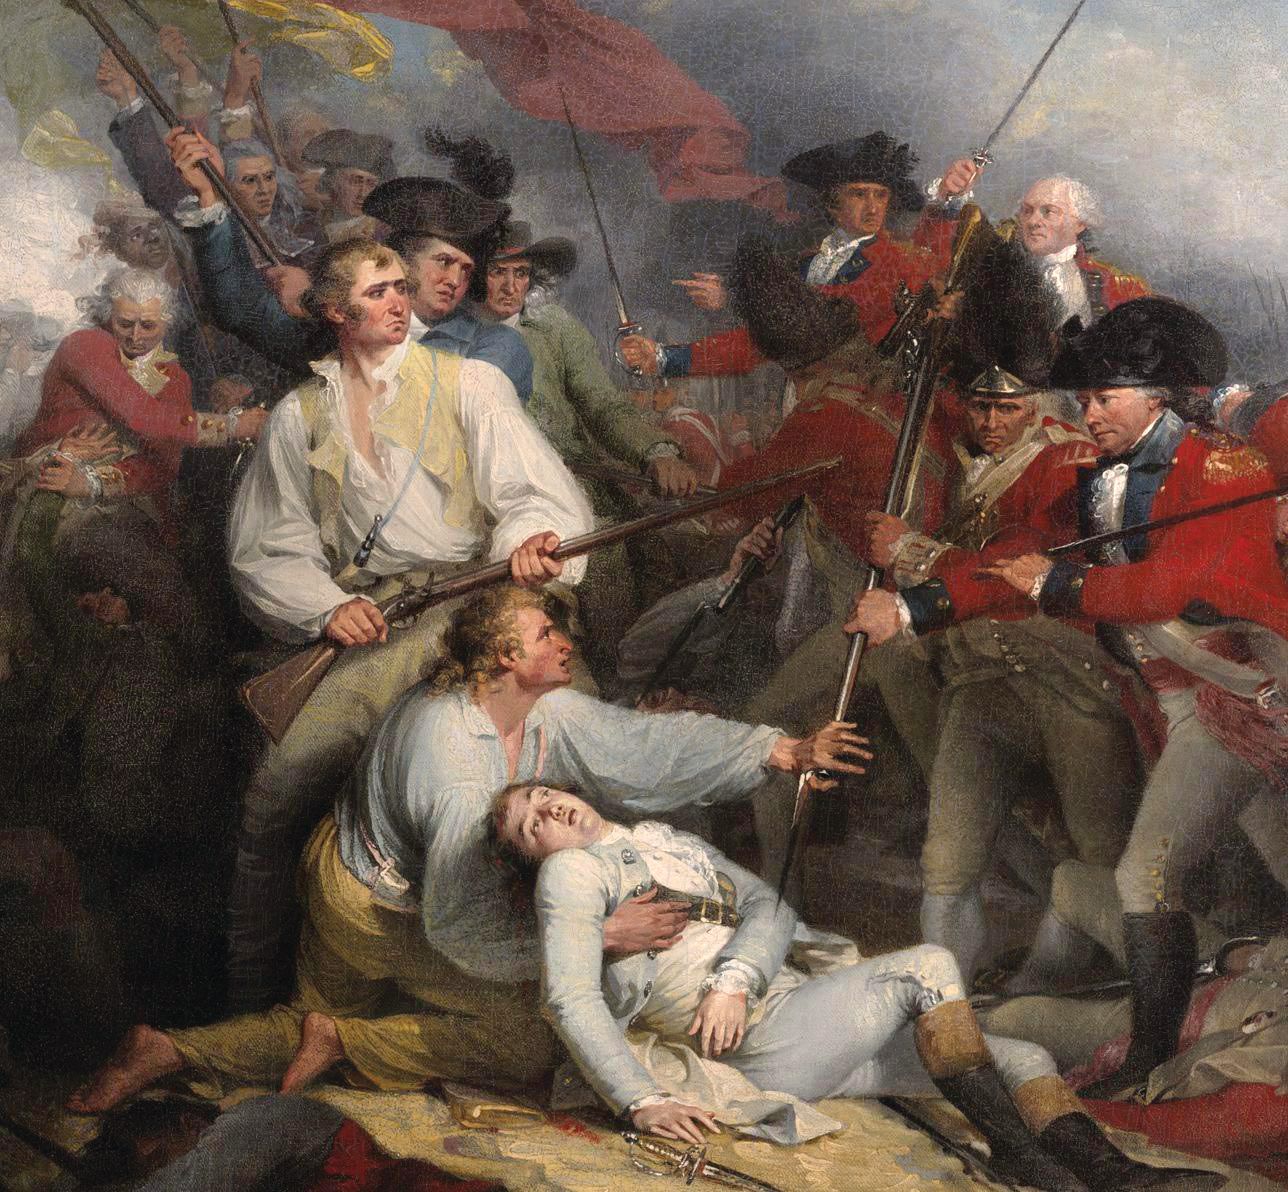 Thomas Knowlton is shown standing over mortally wounded Joseph Warren in this detail of John Trumball’s painting of the Battle of Bunker Hill. 